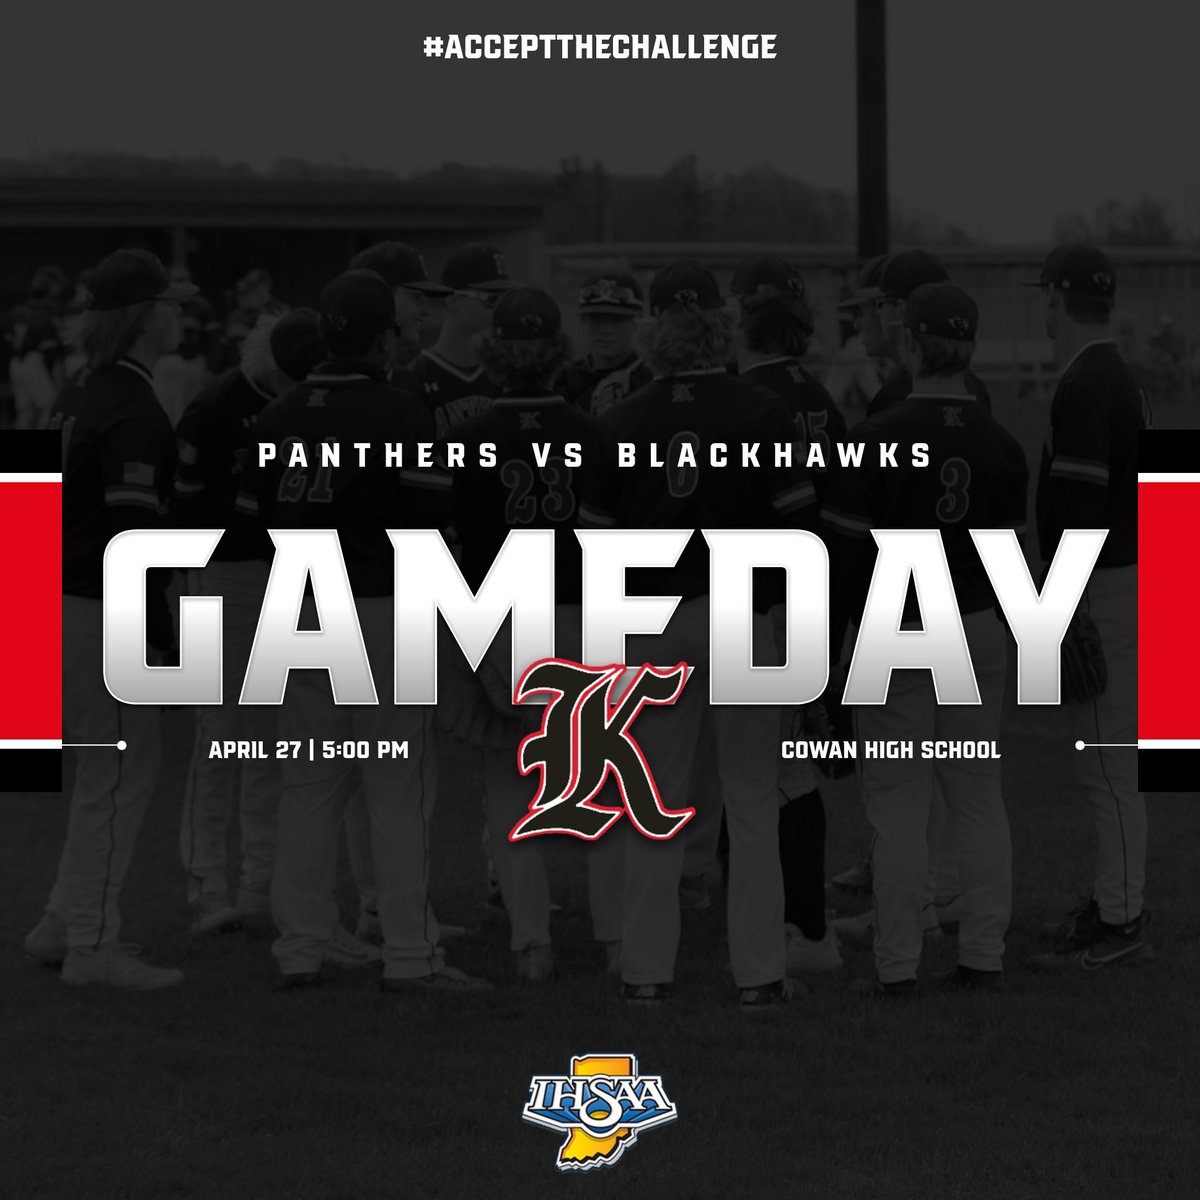 PANTHER BASEBALL GAMEDAY! 
ON THE ROAD: 🚌@Blackhawk_Base (8-5)
🕔5:00 PM
Forecast: ☁️65°
#WeAreKtownBSBL ⚾️
#PantherPride🐾 #Expect2Win #AcceptTheChallenge 🇺🇸